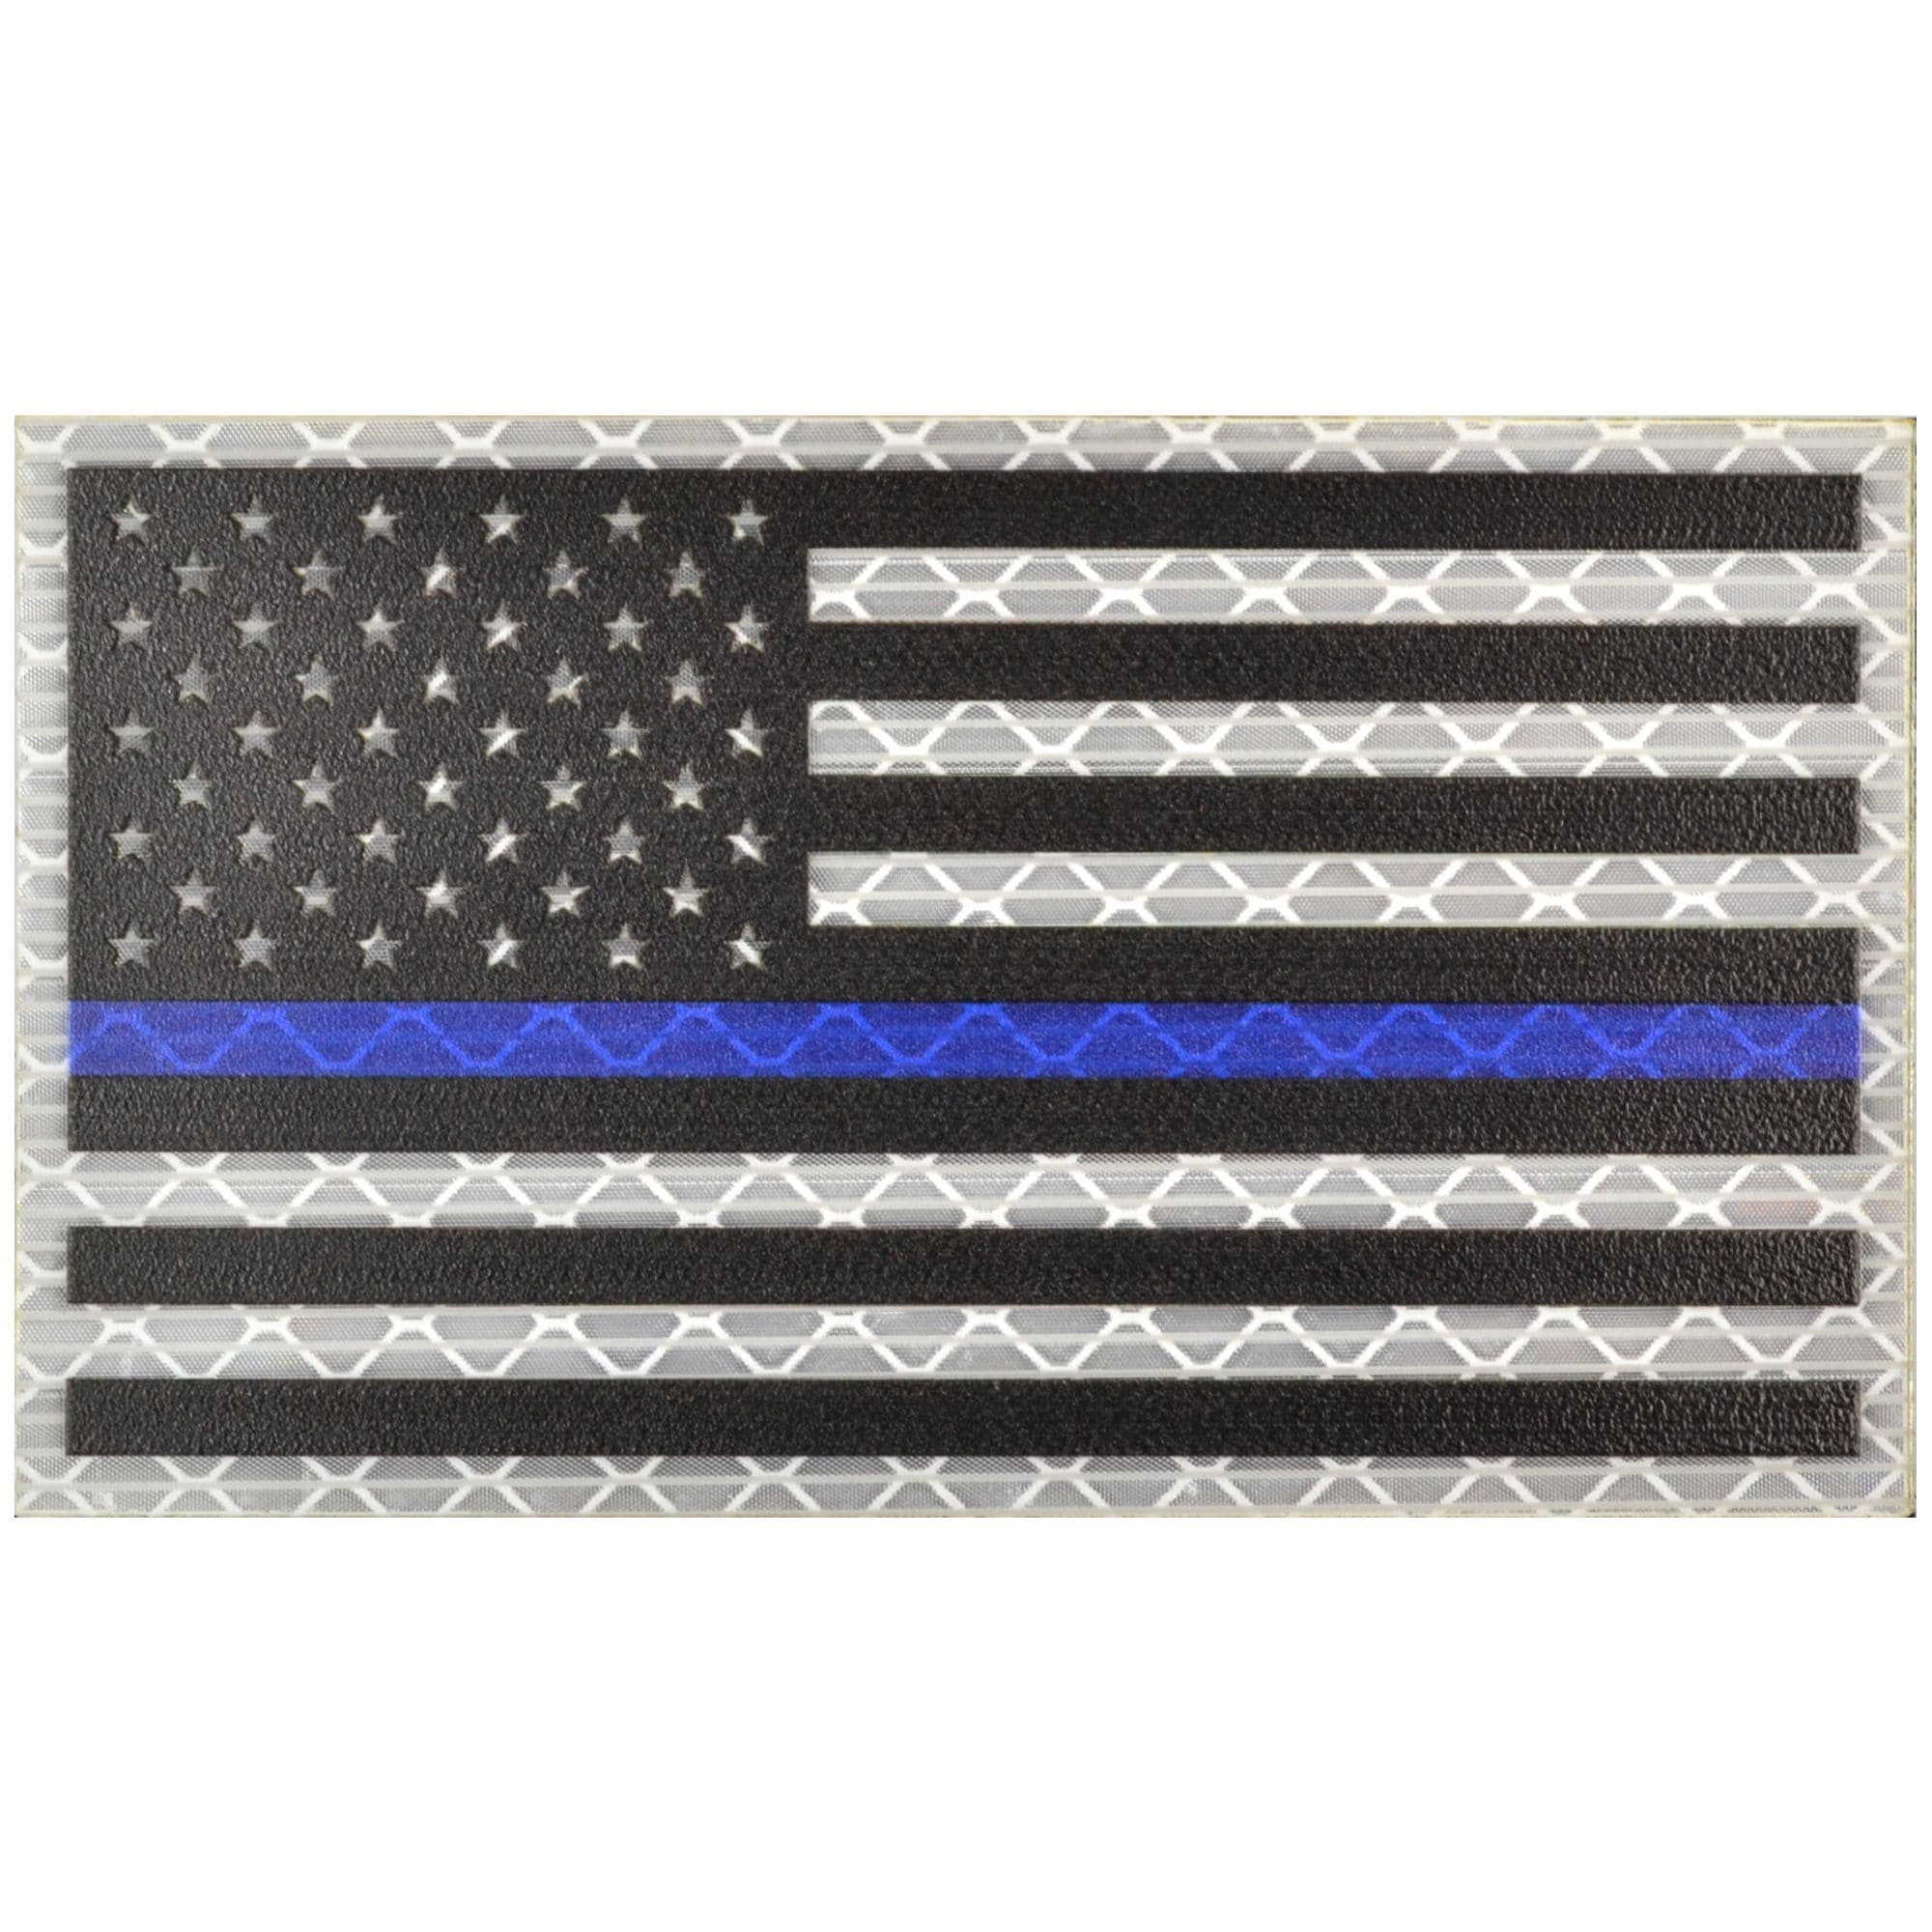 Tactical Gear Junkie Patches Forward Reflective Printed Thin Blue Line USA Flag - 2x3.5 Patch